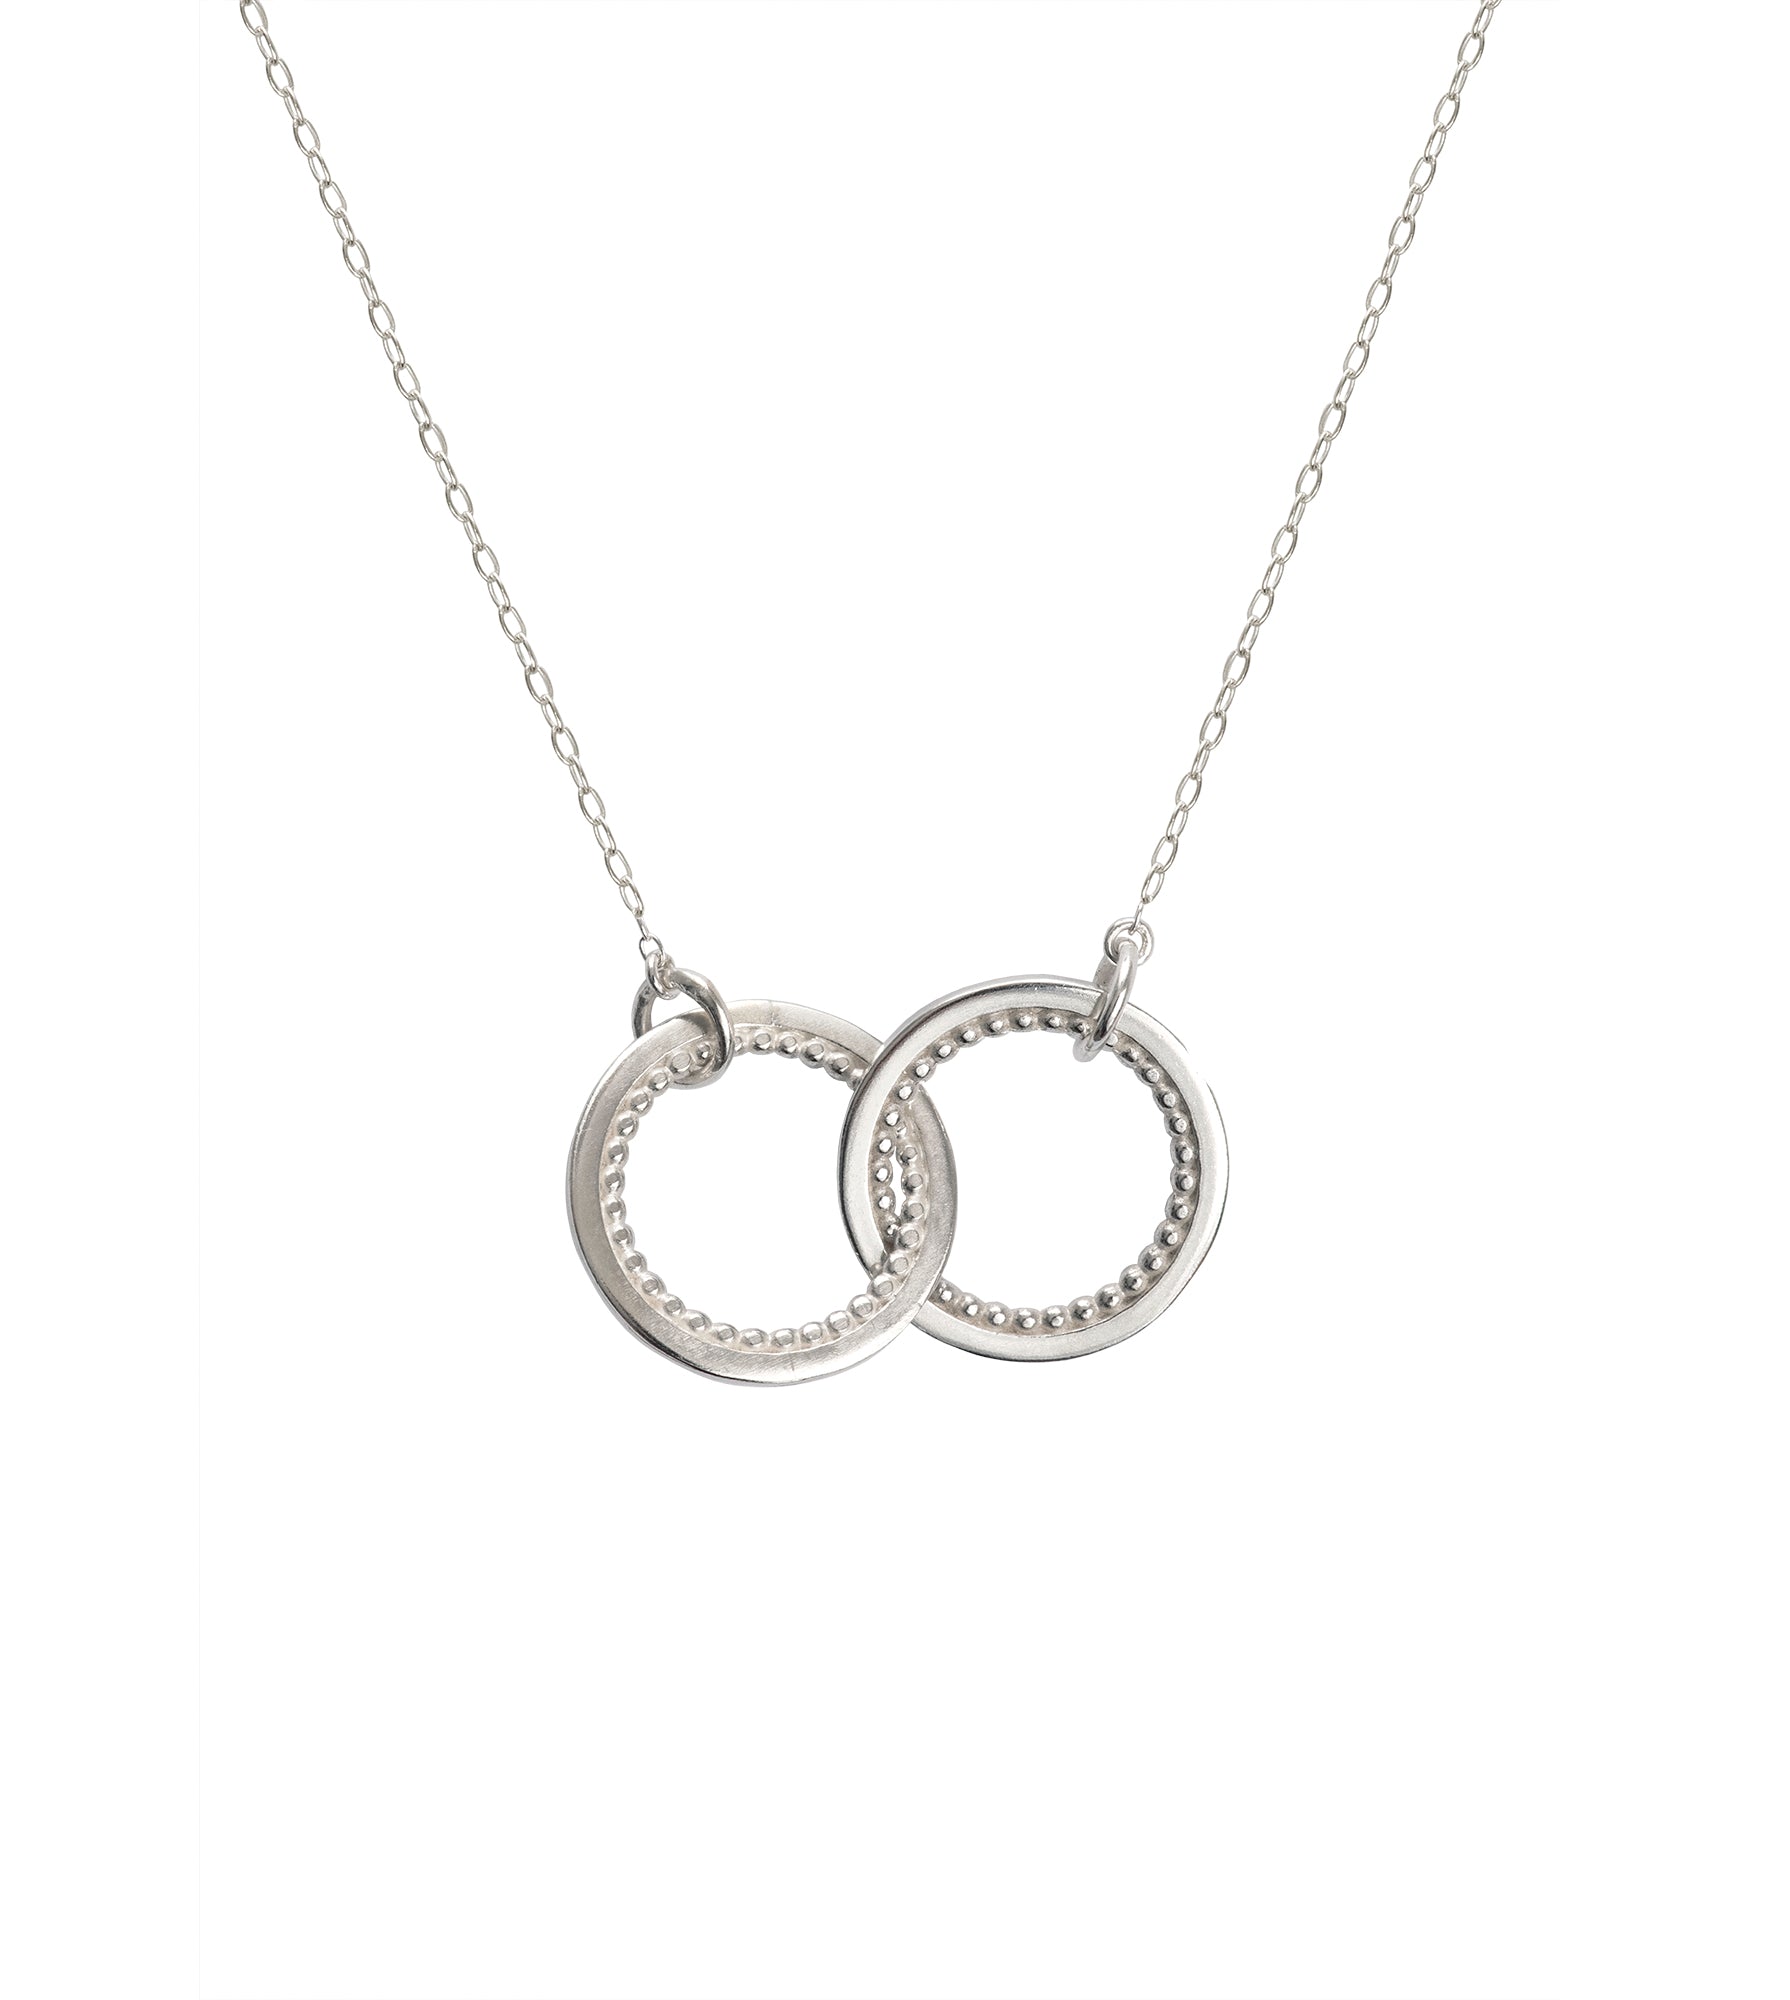 Connecting Meridian Necklace